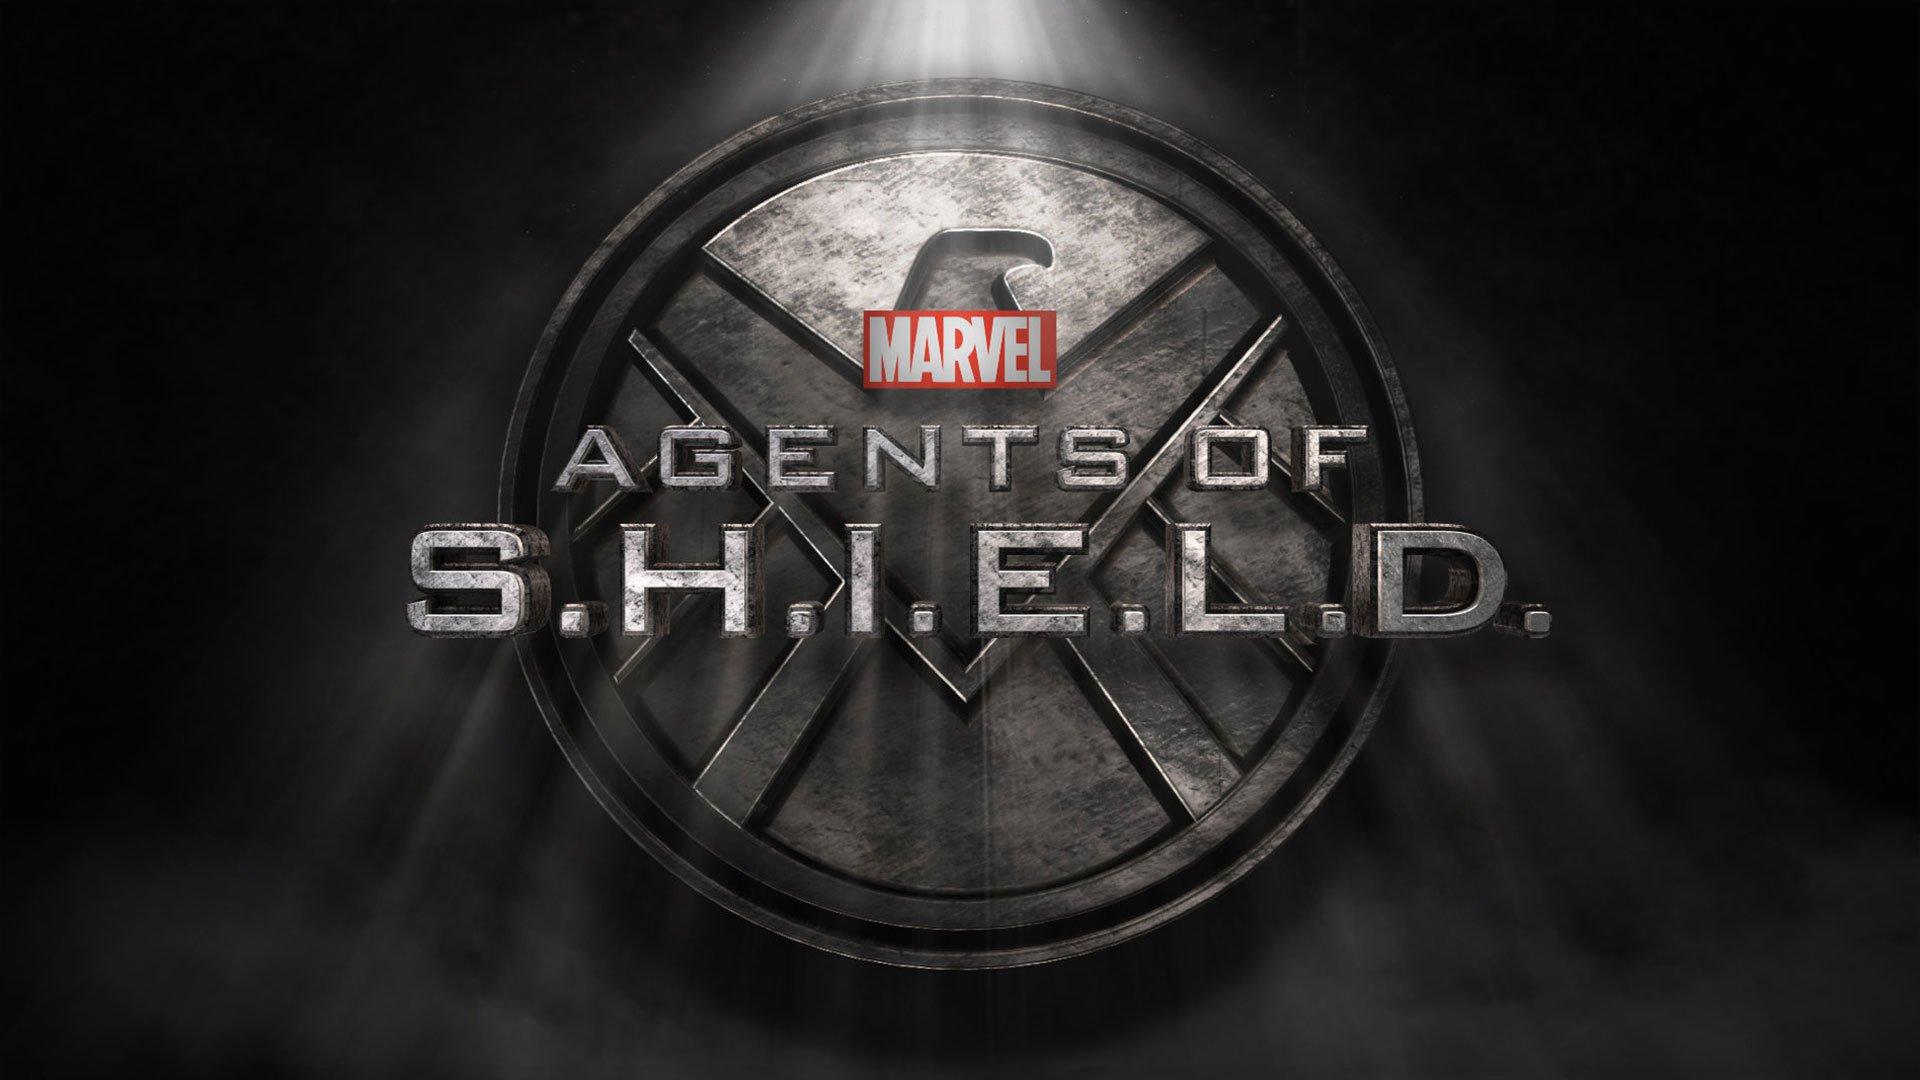 Marvel's Agents Of S.H.I.E.L.D. Wallpaper, Picture, Image